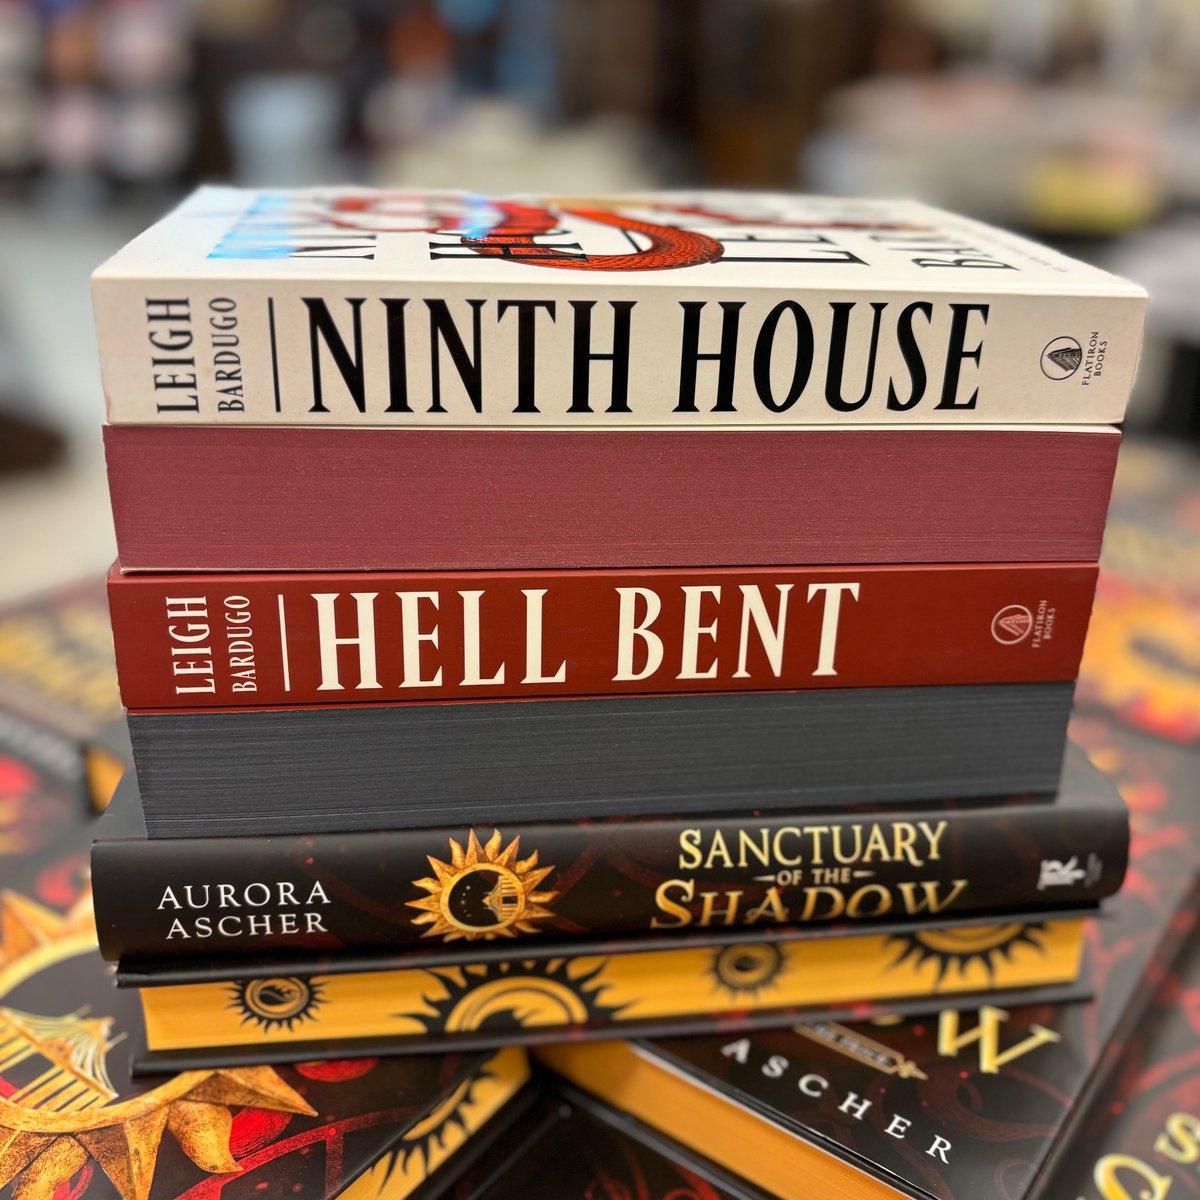 Don't worry. Your #newbooks will wait for you while you get the driveway shoveled. ❄️

#bnmidwest #spredges #bnbuzz #leighbardugo #ninthhouse #hellbent #auroraascher #sanctuaryoftheshadow #bnexclusive